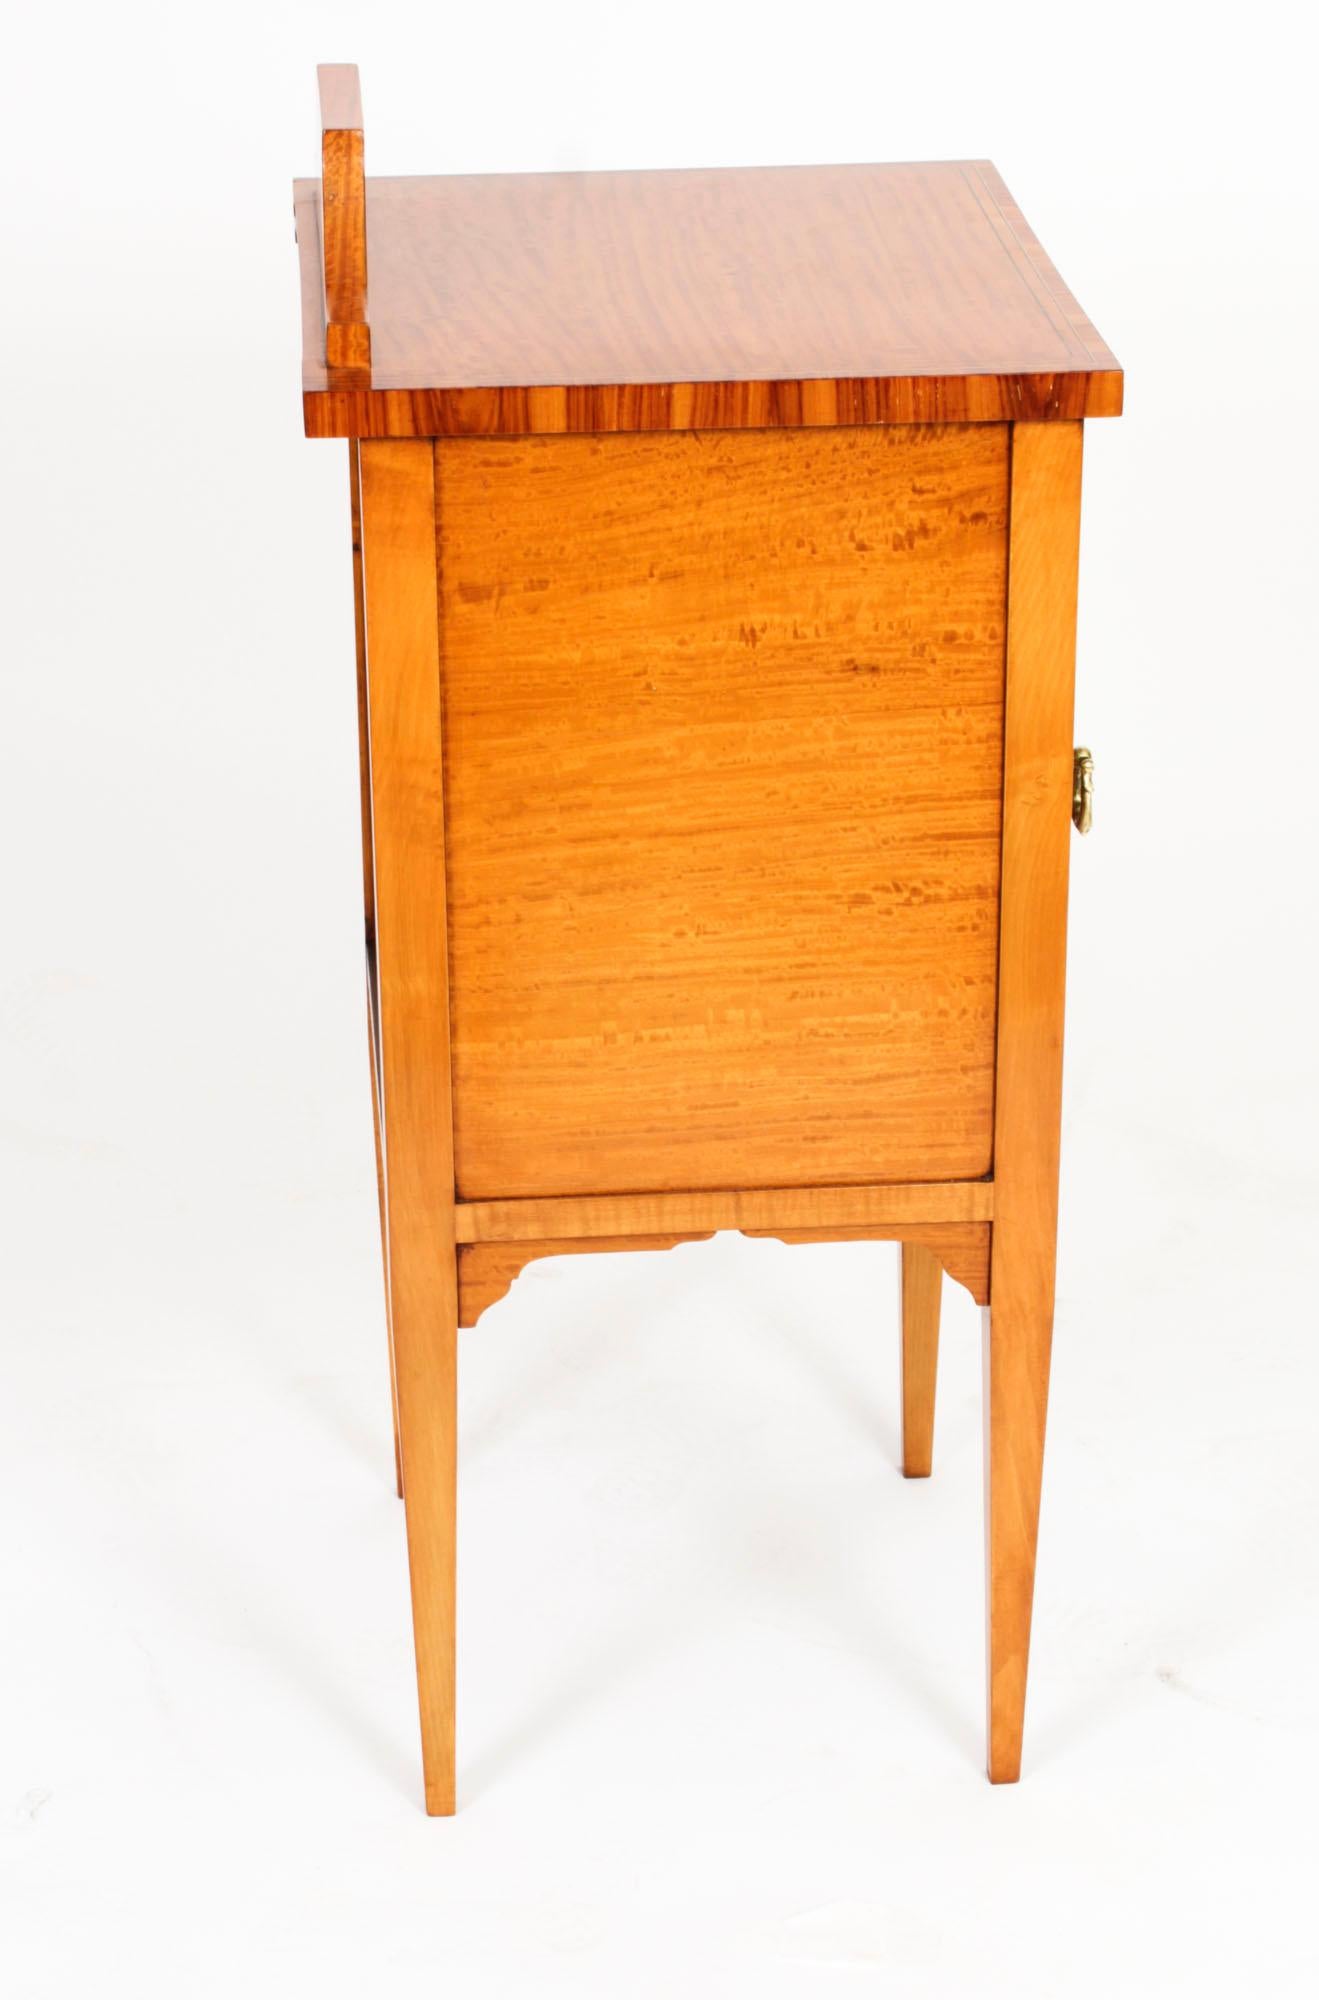 Antique Inlaid Satinwood Bedside Cabinet c.1880 19th Century 5